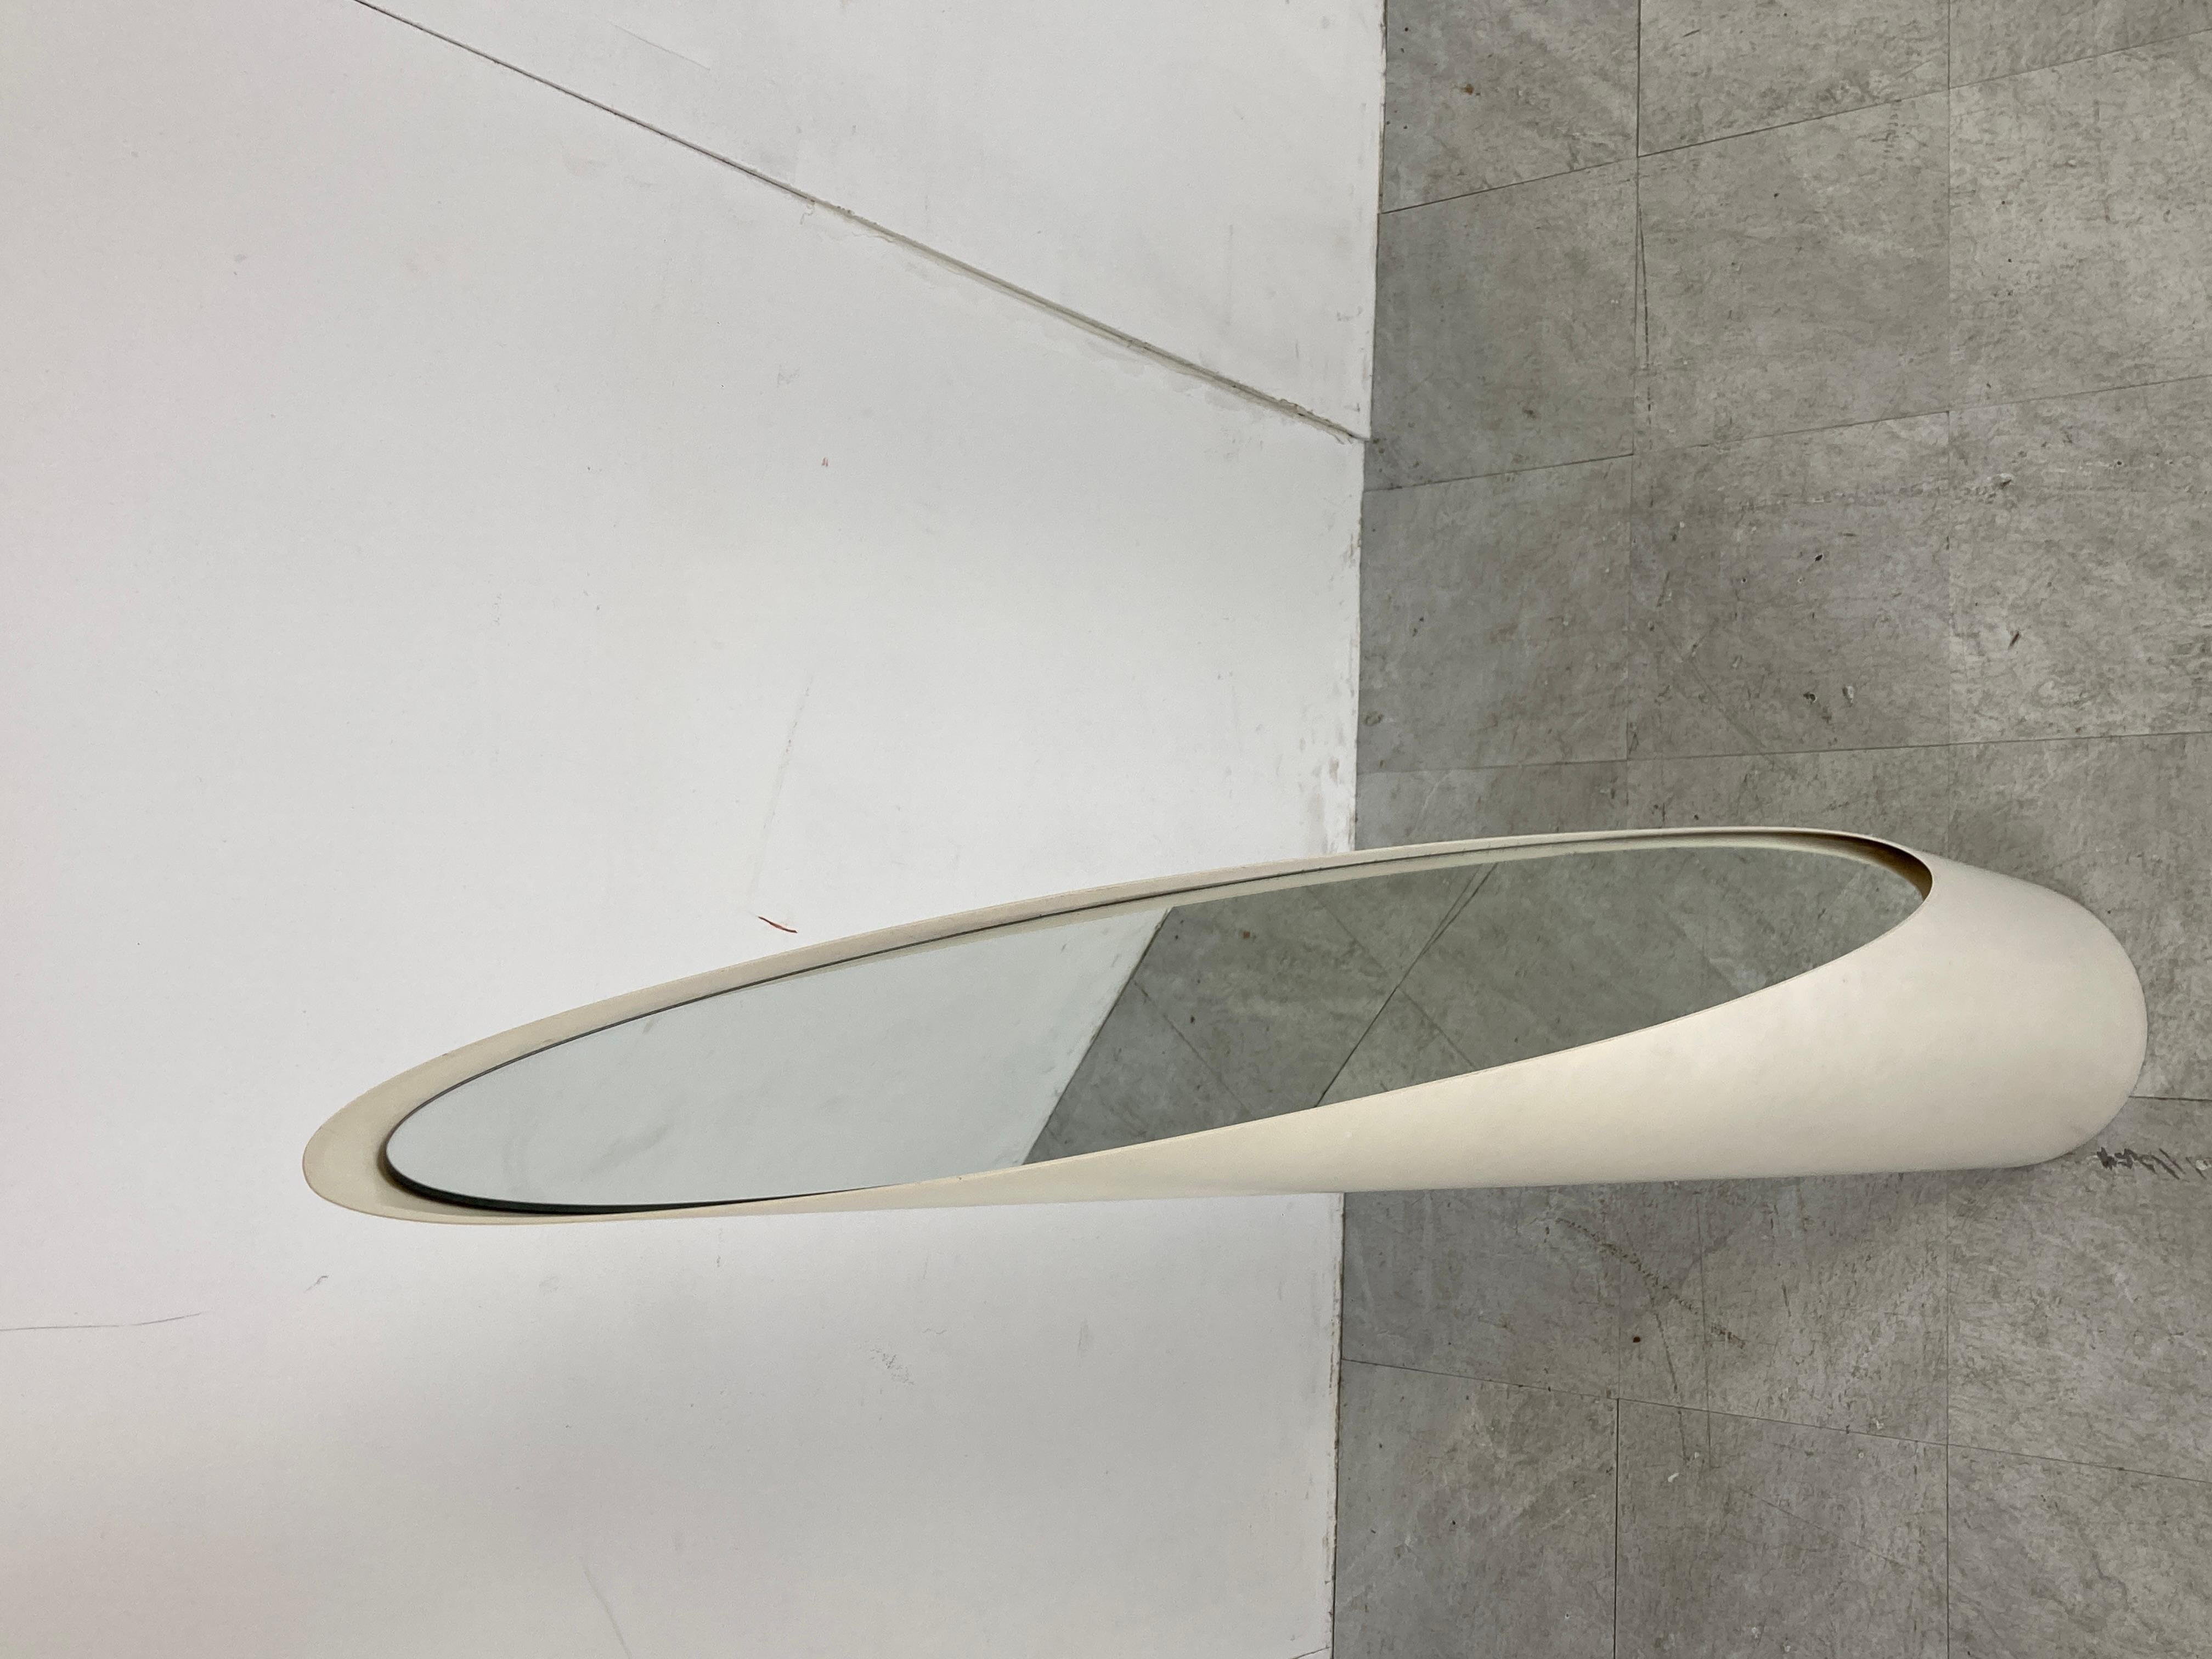 White 'Lipstick' floor mirror designed by Rodolfo Bonetto

good condition.

Great timeless design

1970s - Italy

Dimensions:
Height: 164cm/64.56